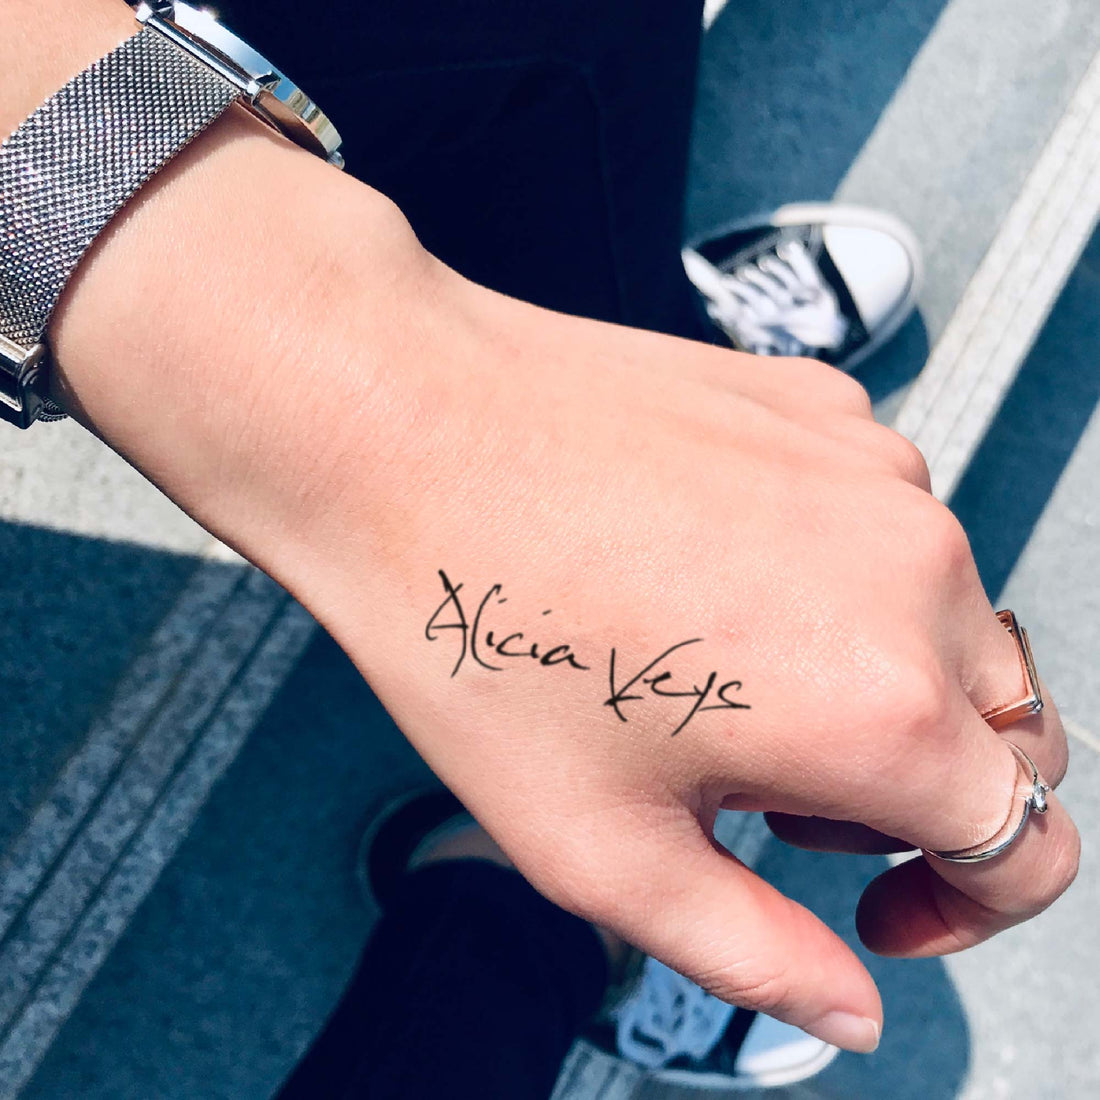 Alicia Keys custom temporary tattoo sticker design idea inspiration meanings removal arm wrist hand words font name signature calligraphy lyrics tour concert outfits merch accessory gift souvenir costumes wear dress up code